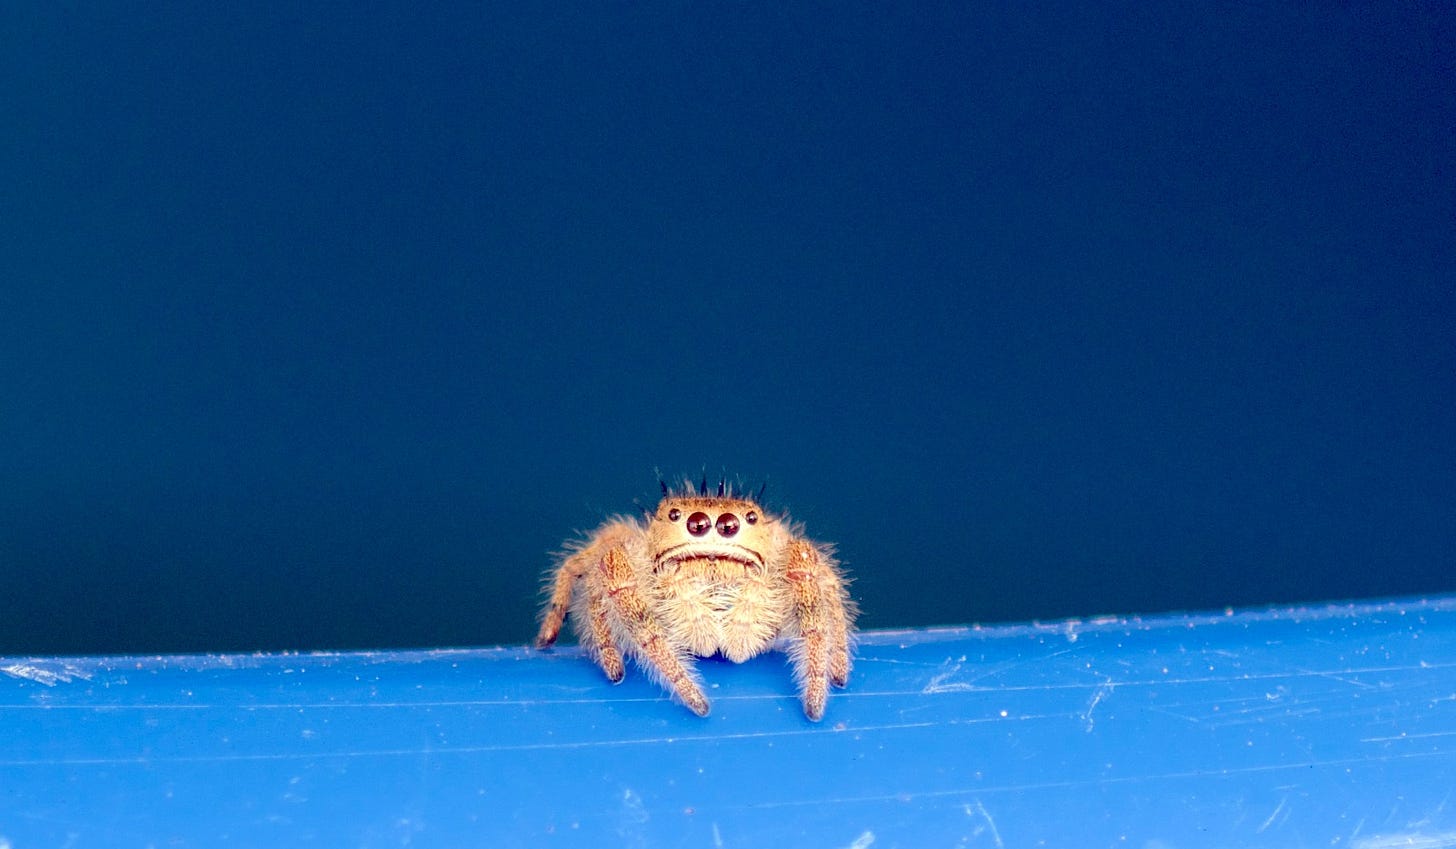 A tiny baby spider with fuzzy legs and mandibles looking directly at the camera on a blue plastic ledge.